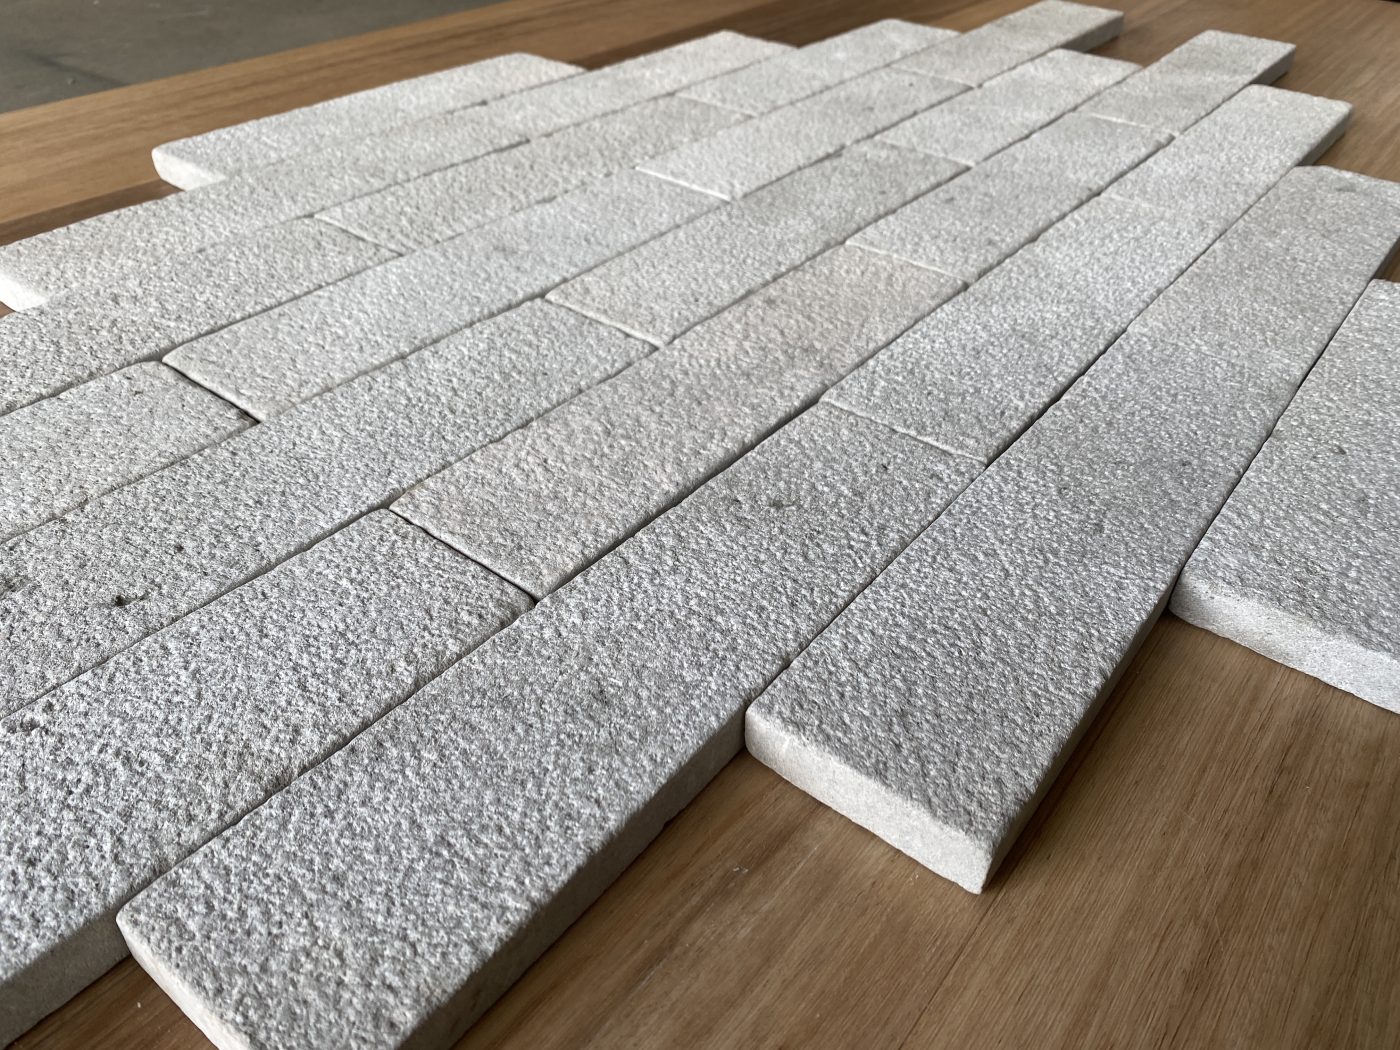 MADDISON-BUSH-HAMMERED-TUMBLED-LIMESTONE-BATON_RMS-TRADERS_NATURAL-STONE-PAVER-SUPPLIER-MELBOURNE-15-1-scaled